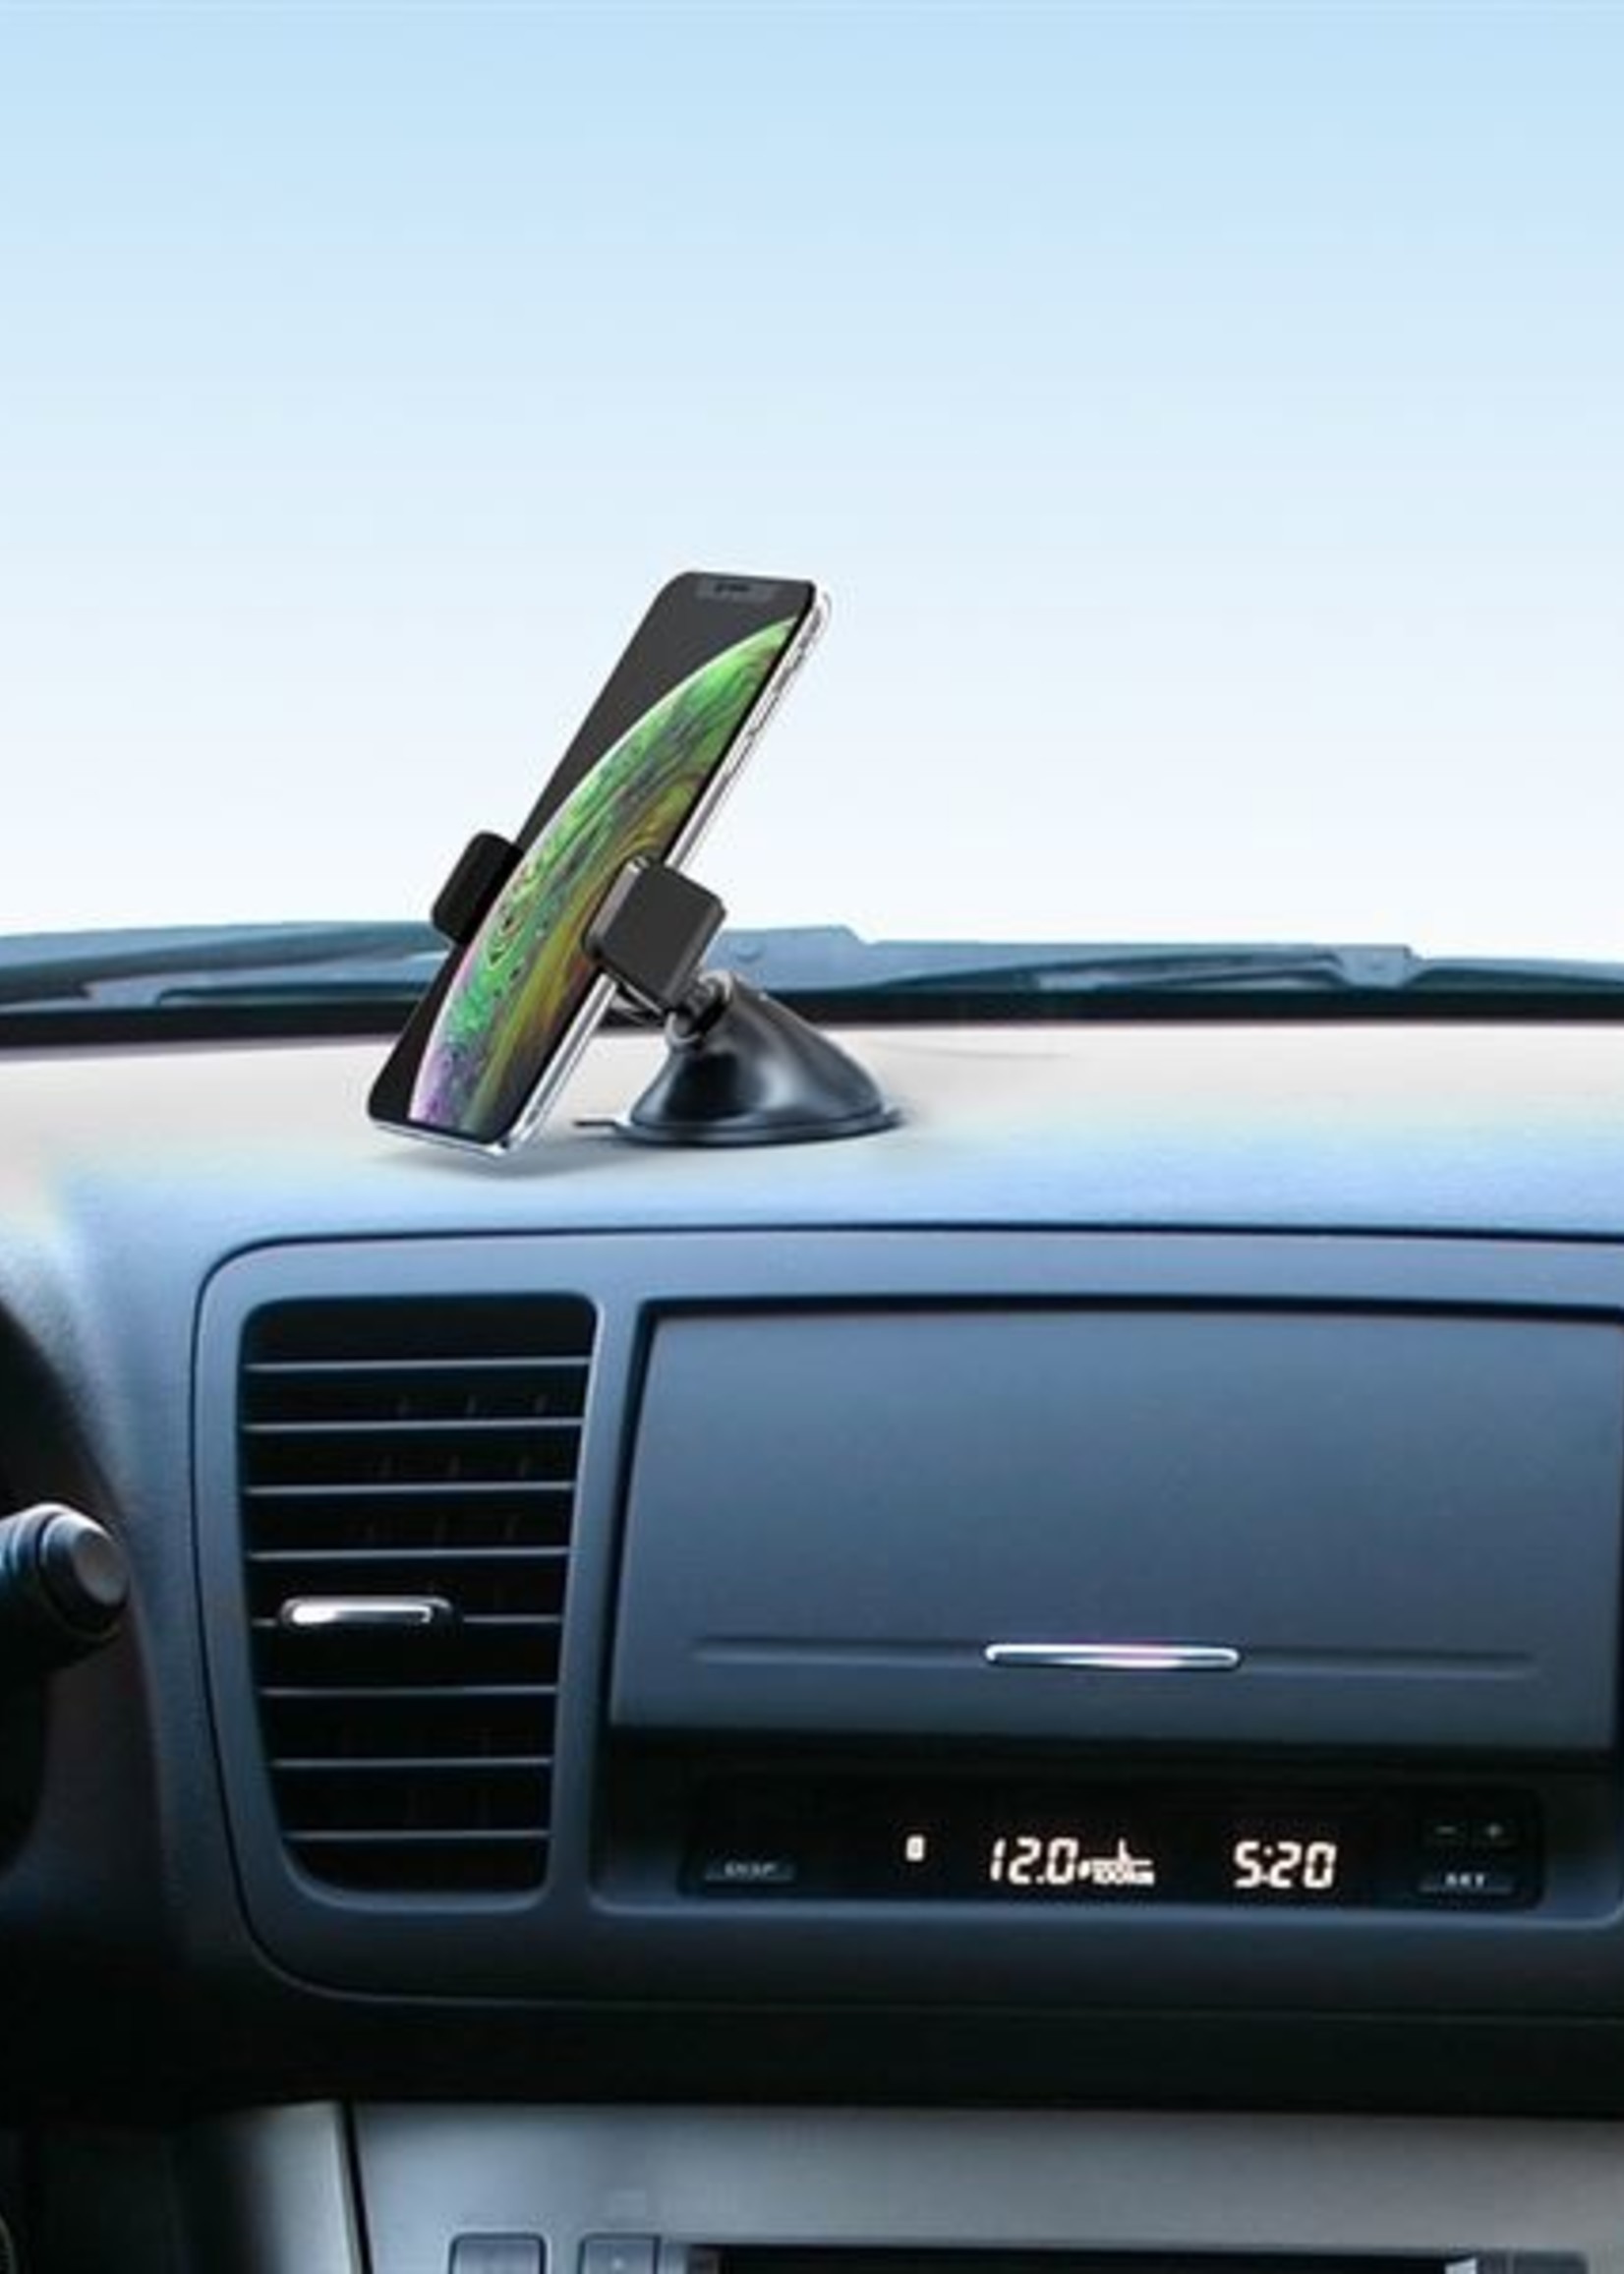 Celly MOUNTDASH - Universal Car Holder